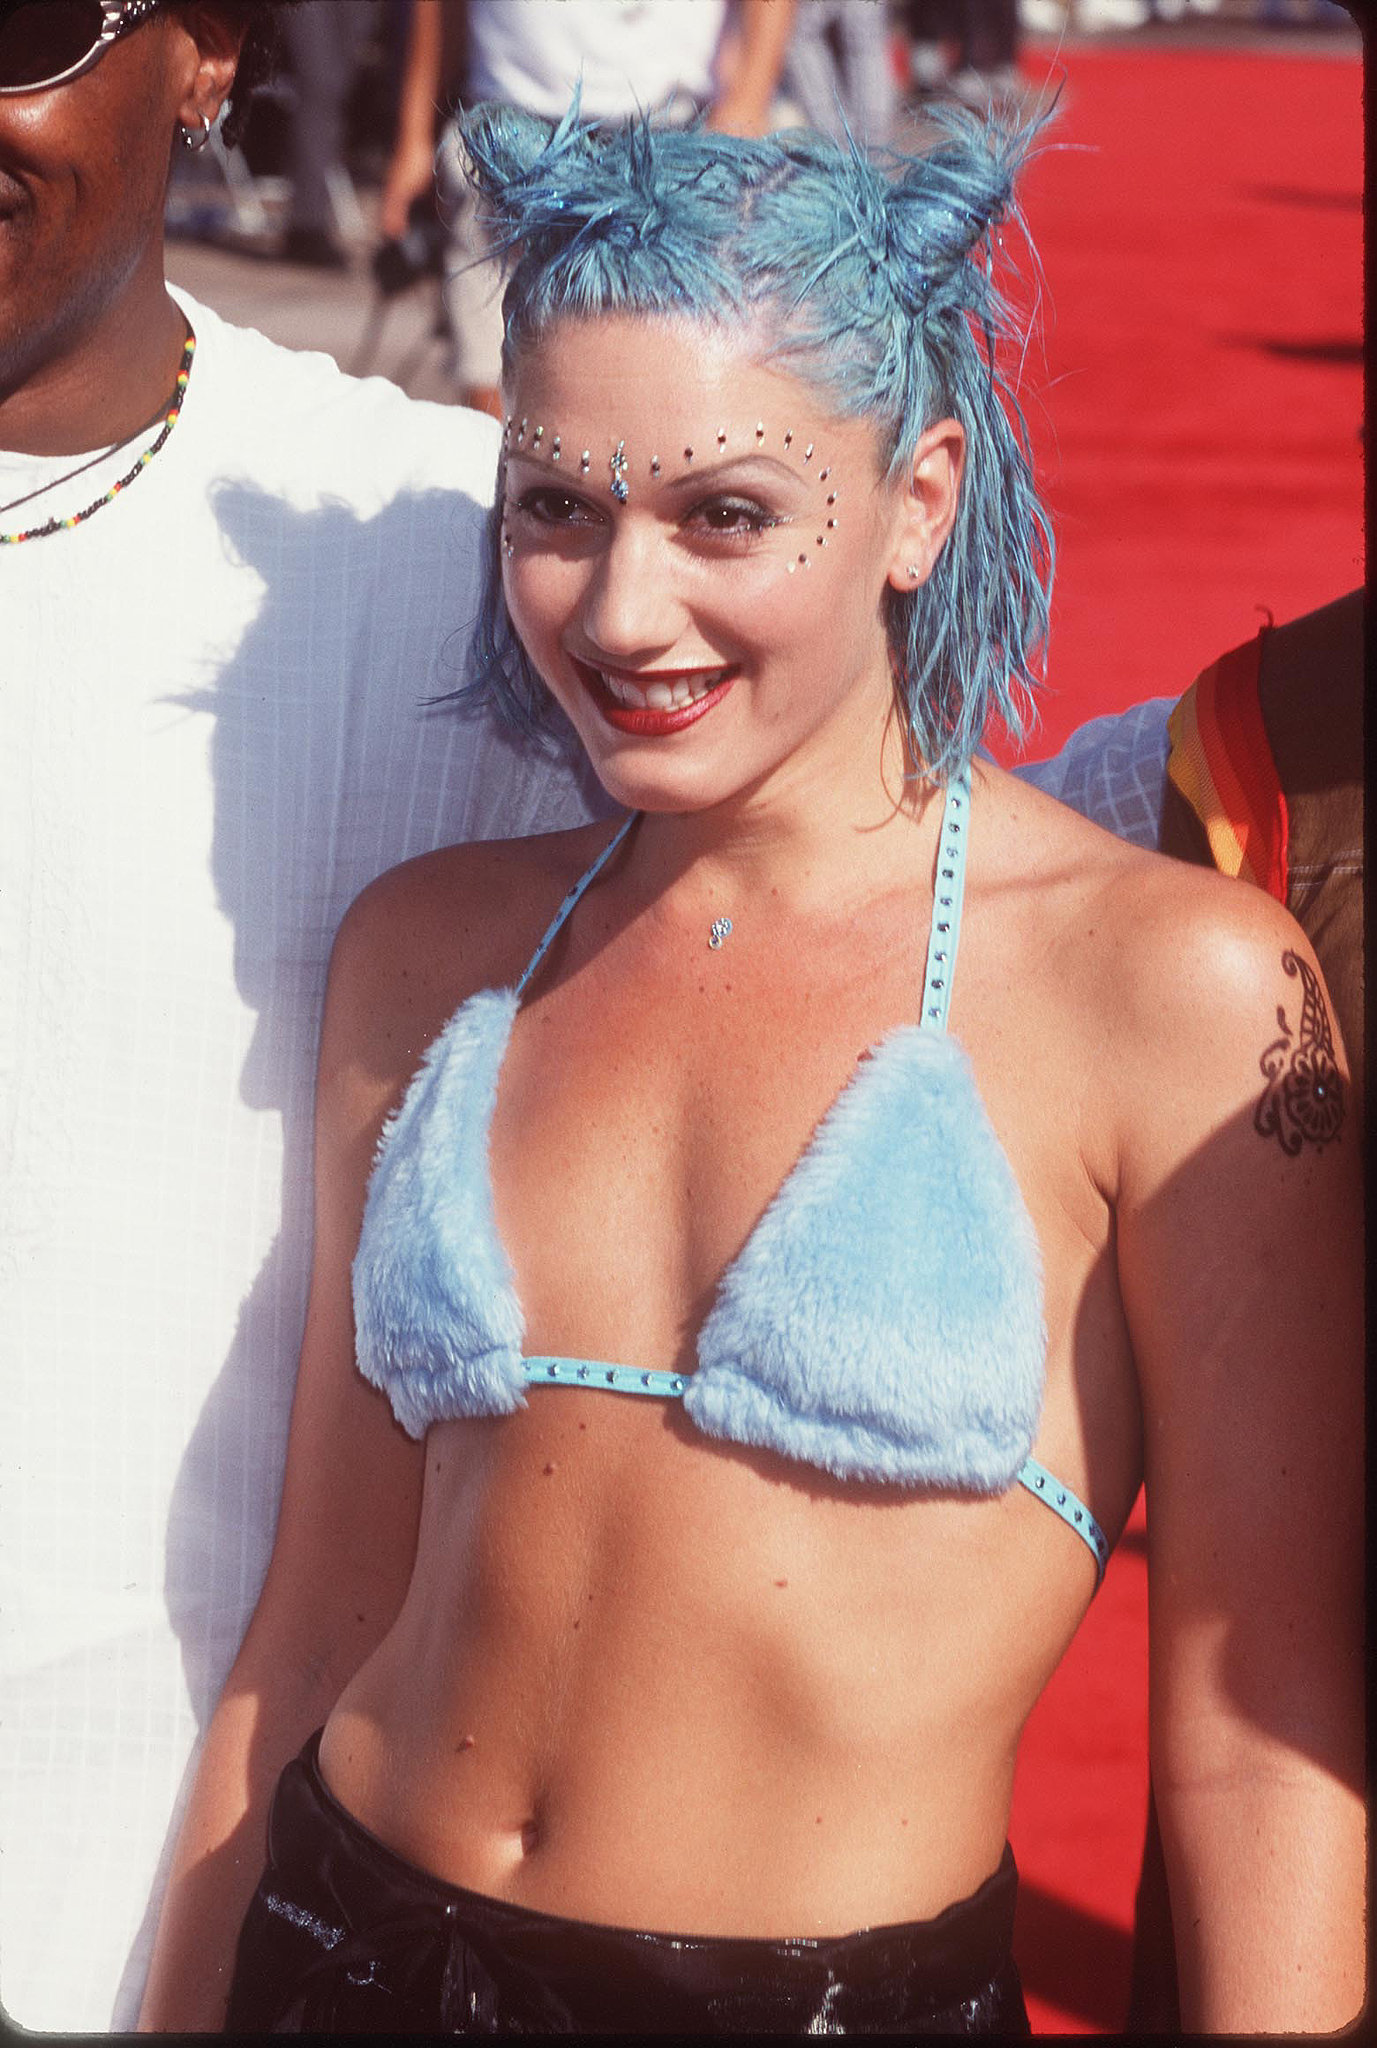 Gwen Stefani Celebrities of the '90s and the Beauty Looks They Loved